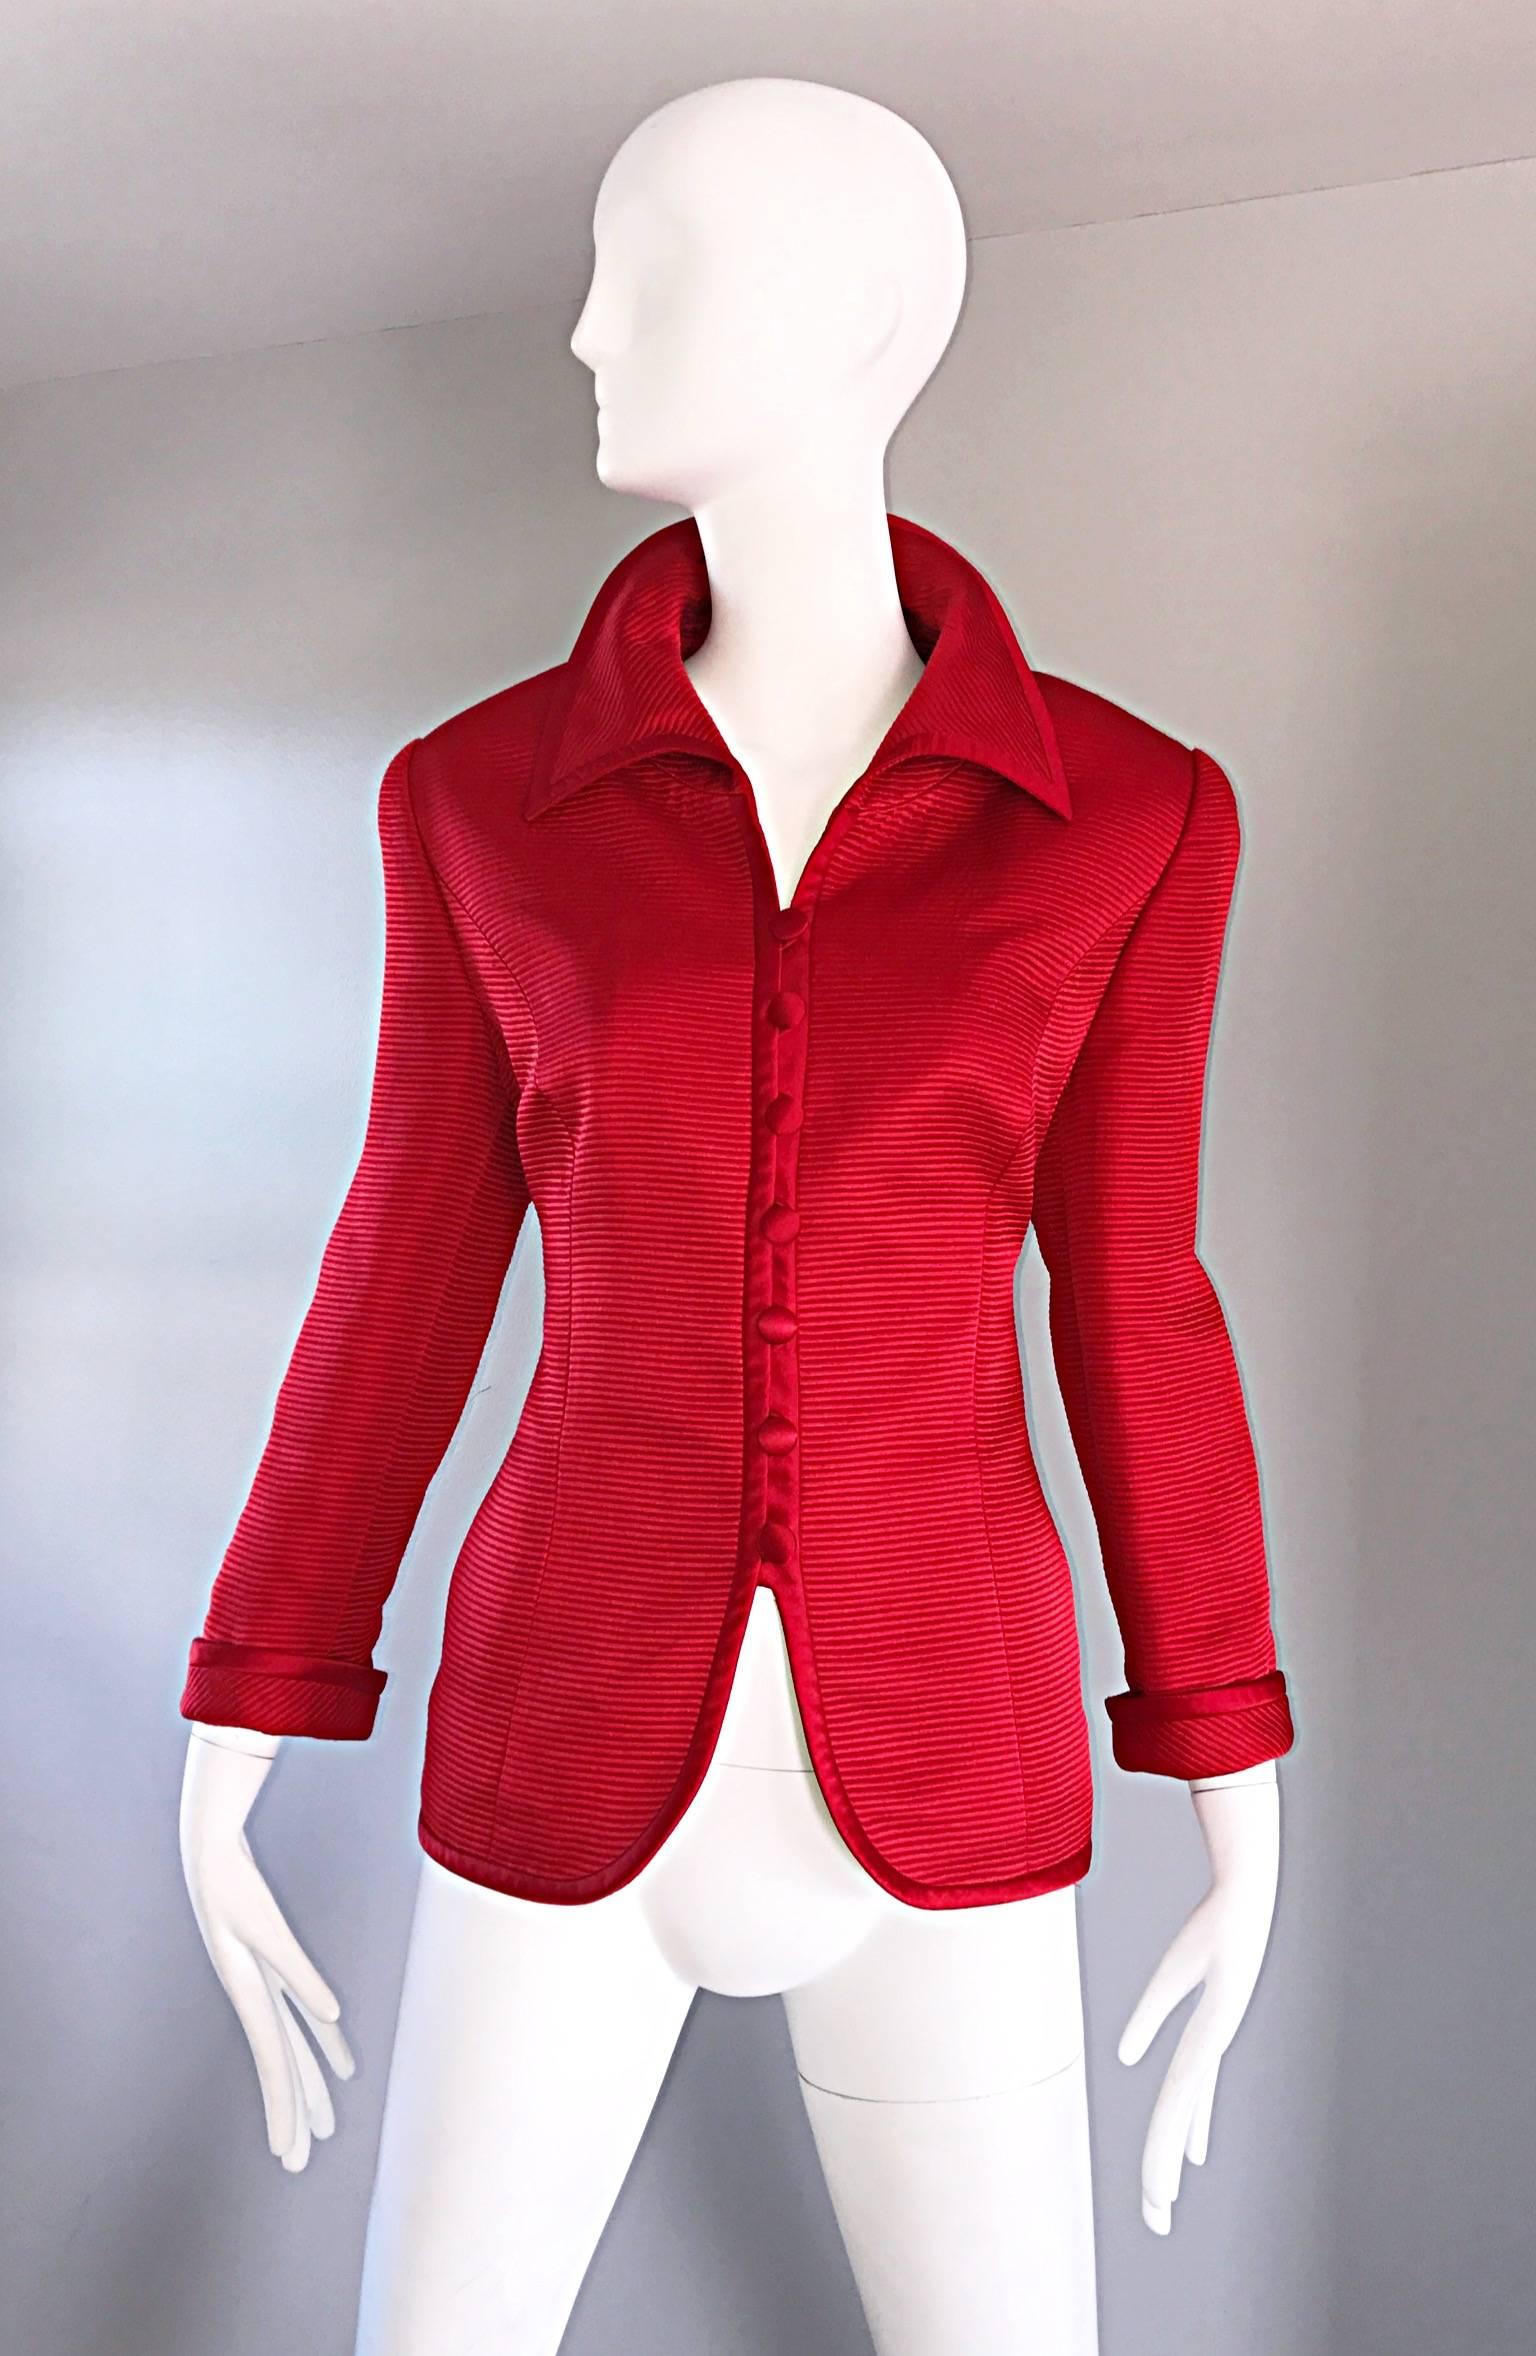 Chic vintage 1990s lipstick cherry red LOUIS FERAUD blazer jacket! Perfect for the upcoming holidays! Vibrant red color, with a textured ribbed silk and wool blend. Perfectly tailored bodice, with an Avant Garde collar. POCKETS at both sides of the